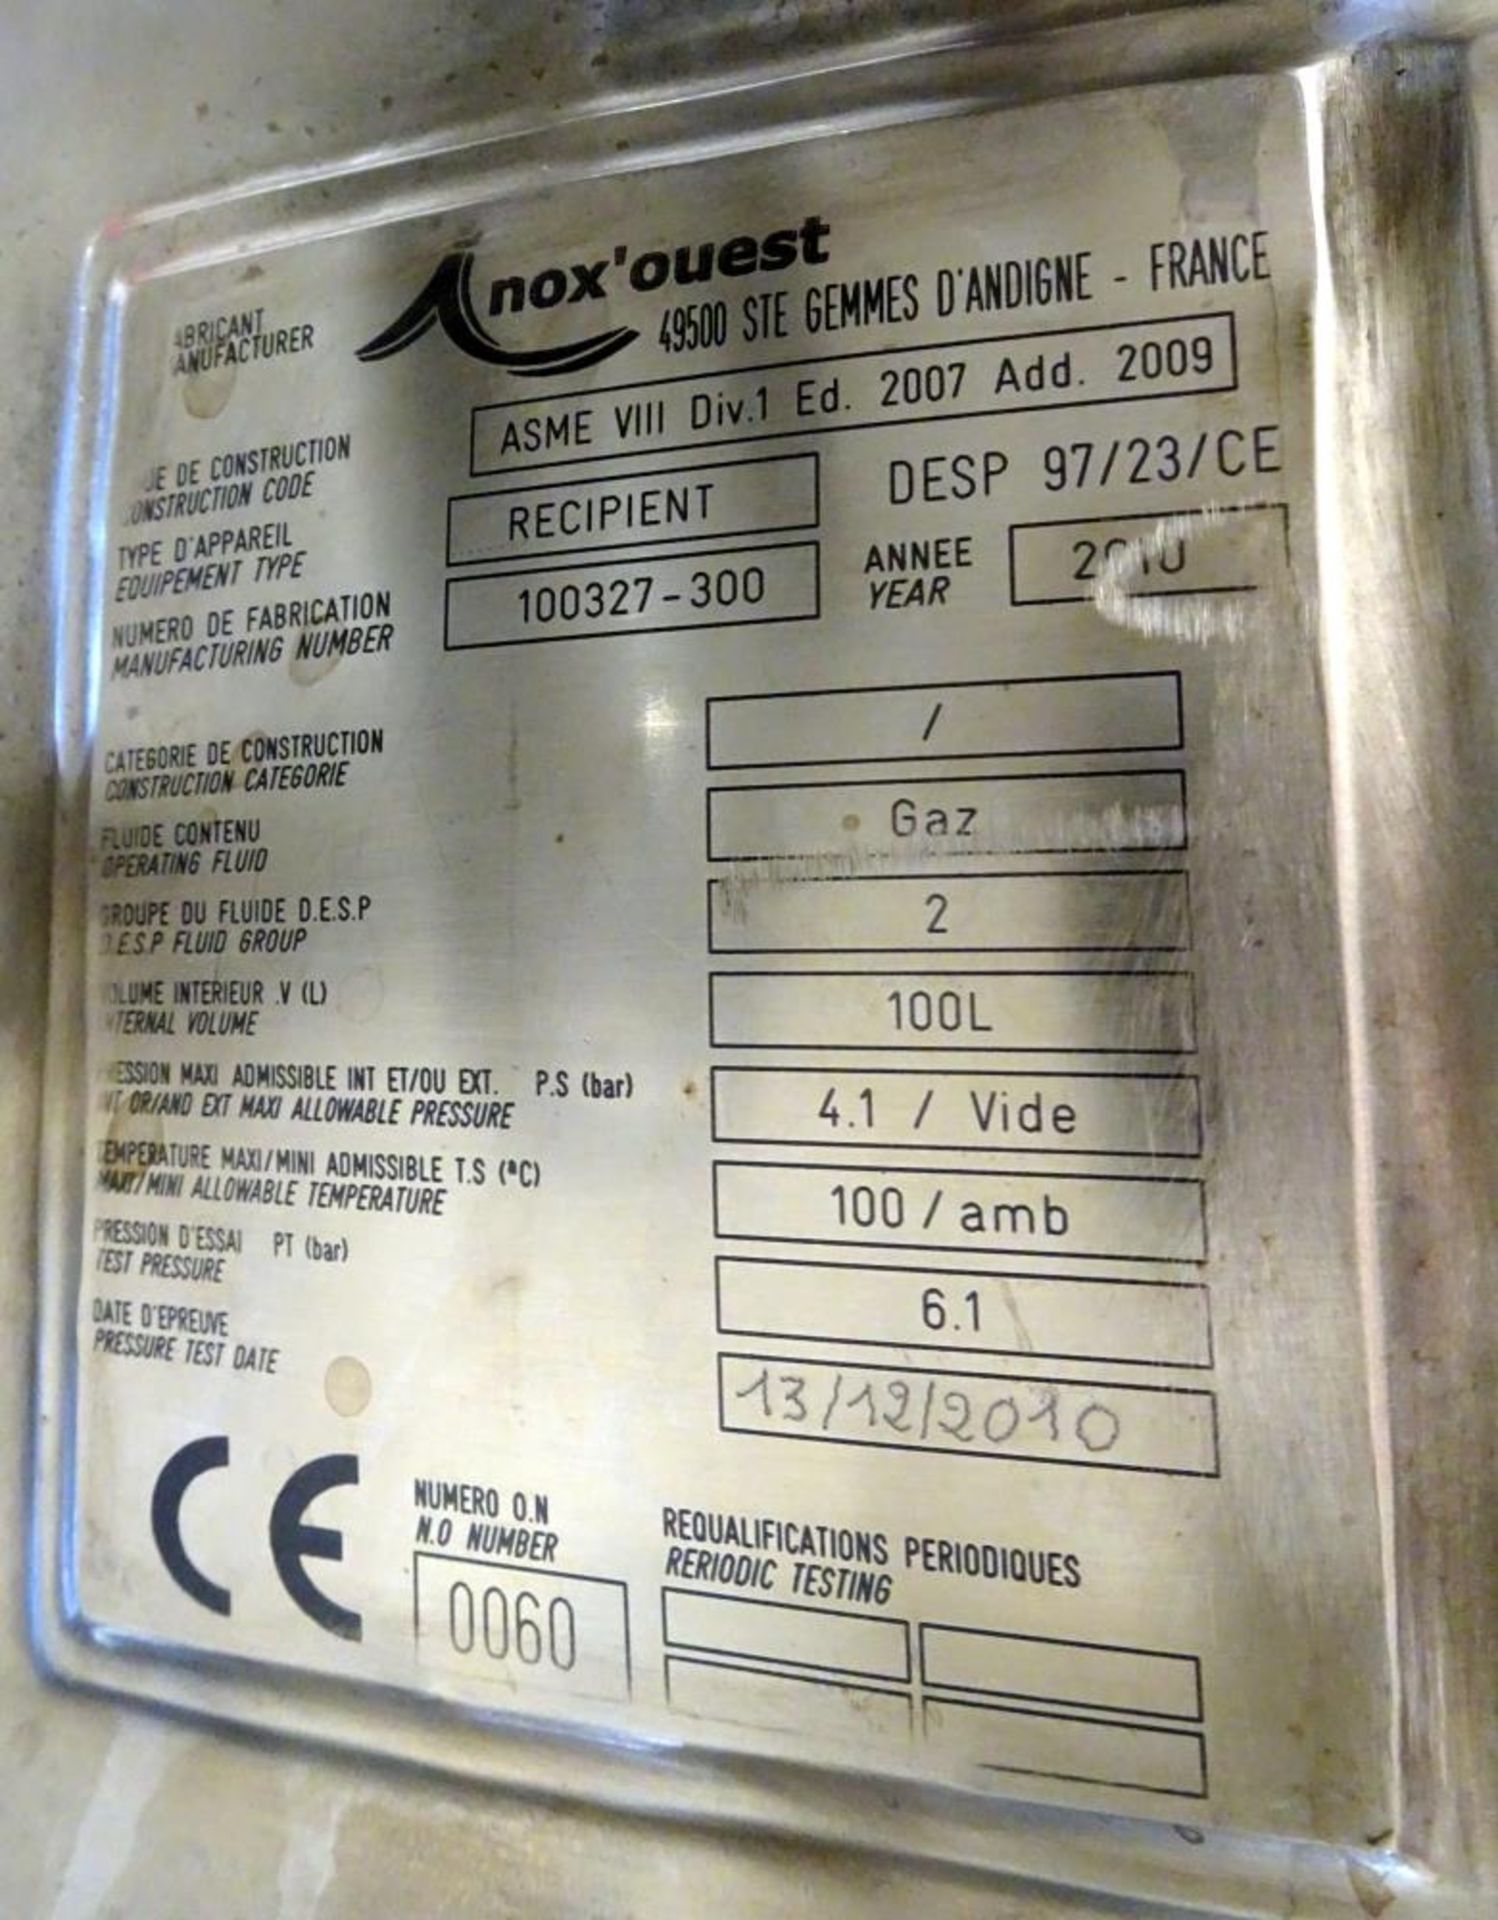 Lot of (3) Used- Inox'ouest Pressure Mix Tank, 100 Liter, 316L Stainless Steel, Vertical. - Image 29 of 29